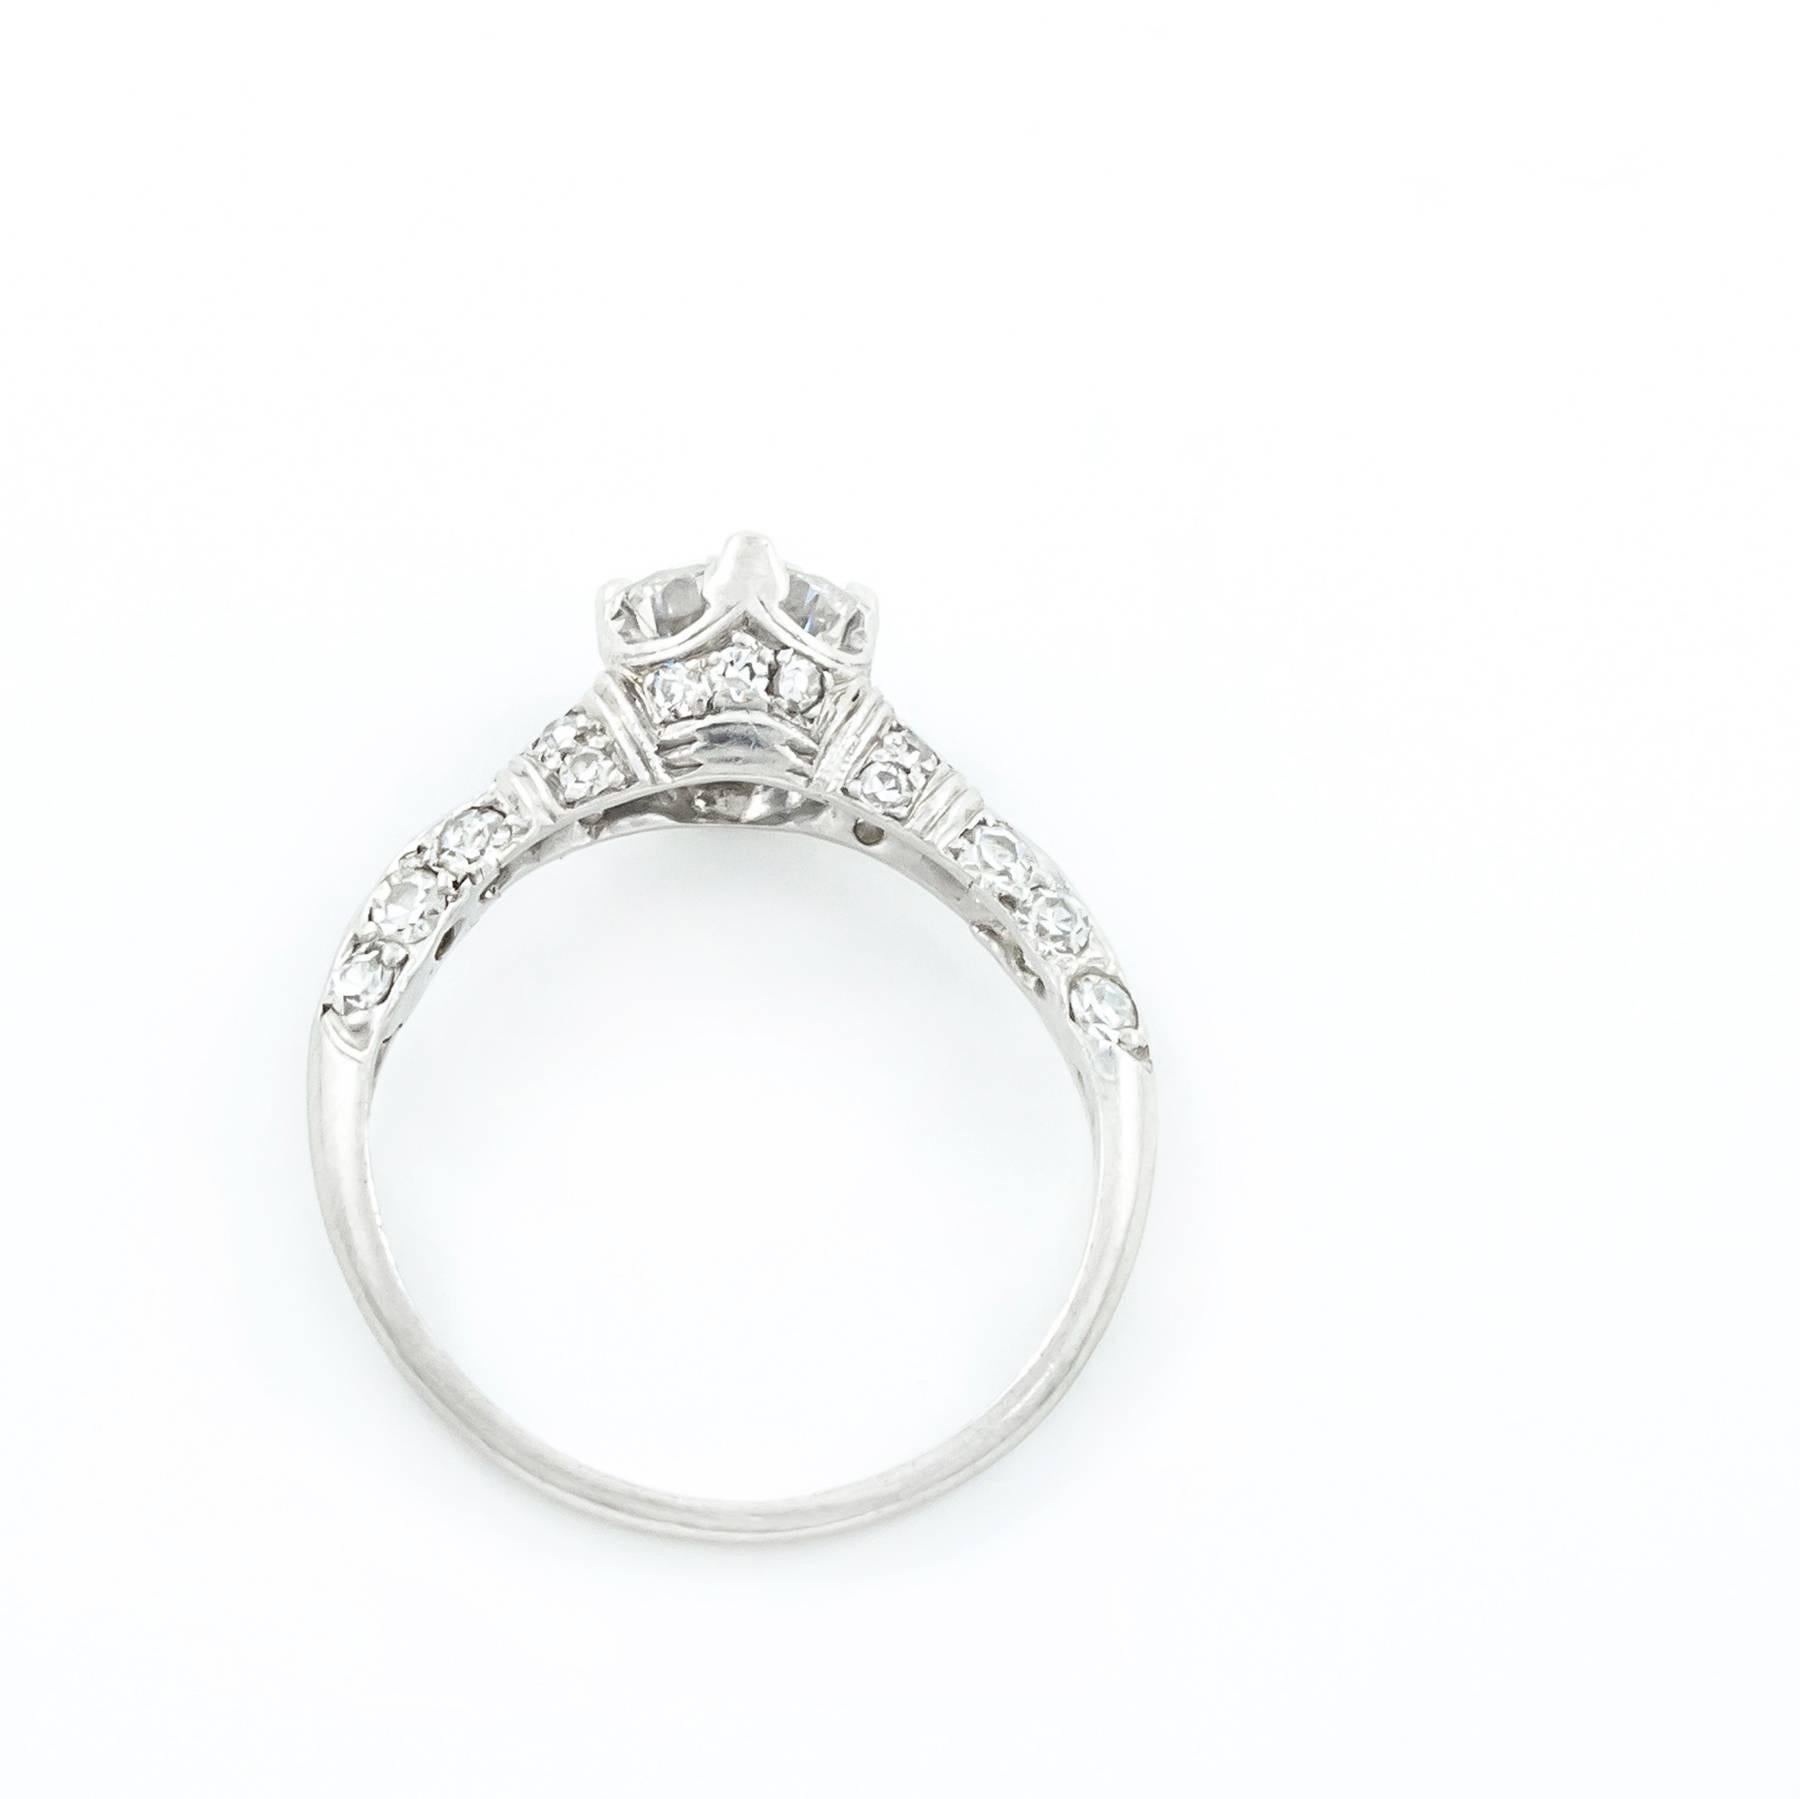 Art Deco Diamond Platinum Engagement Ring by Birks In Excellent Condition For Sale In Toronto, Ontario